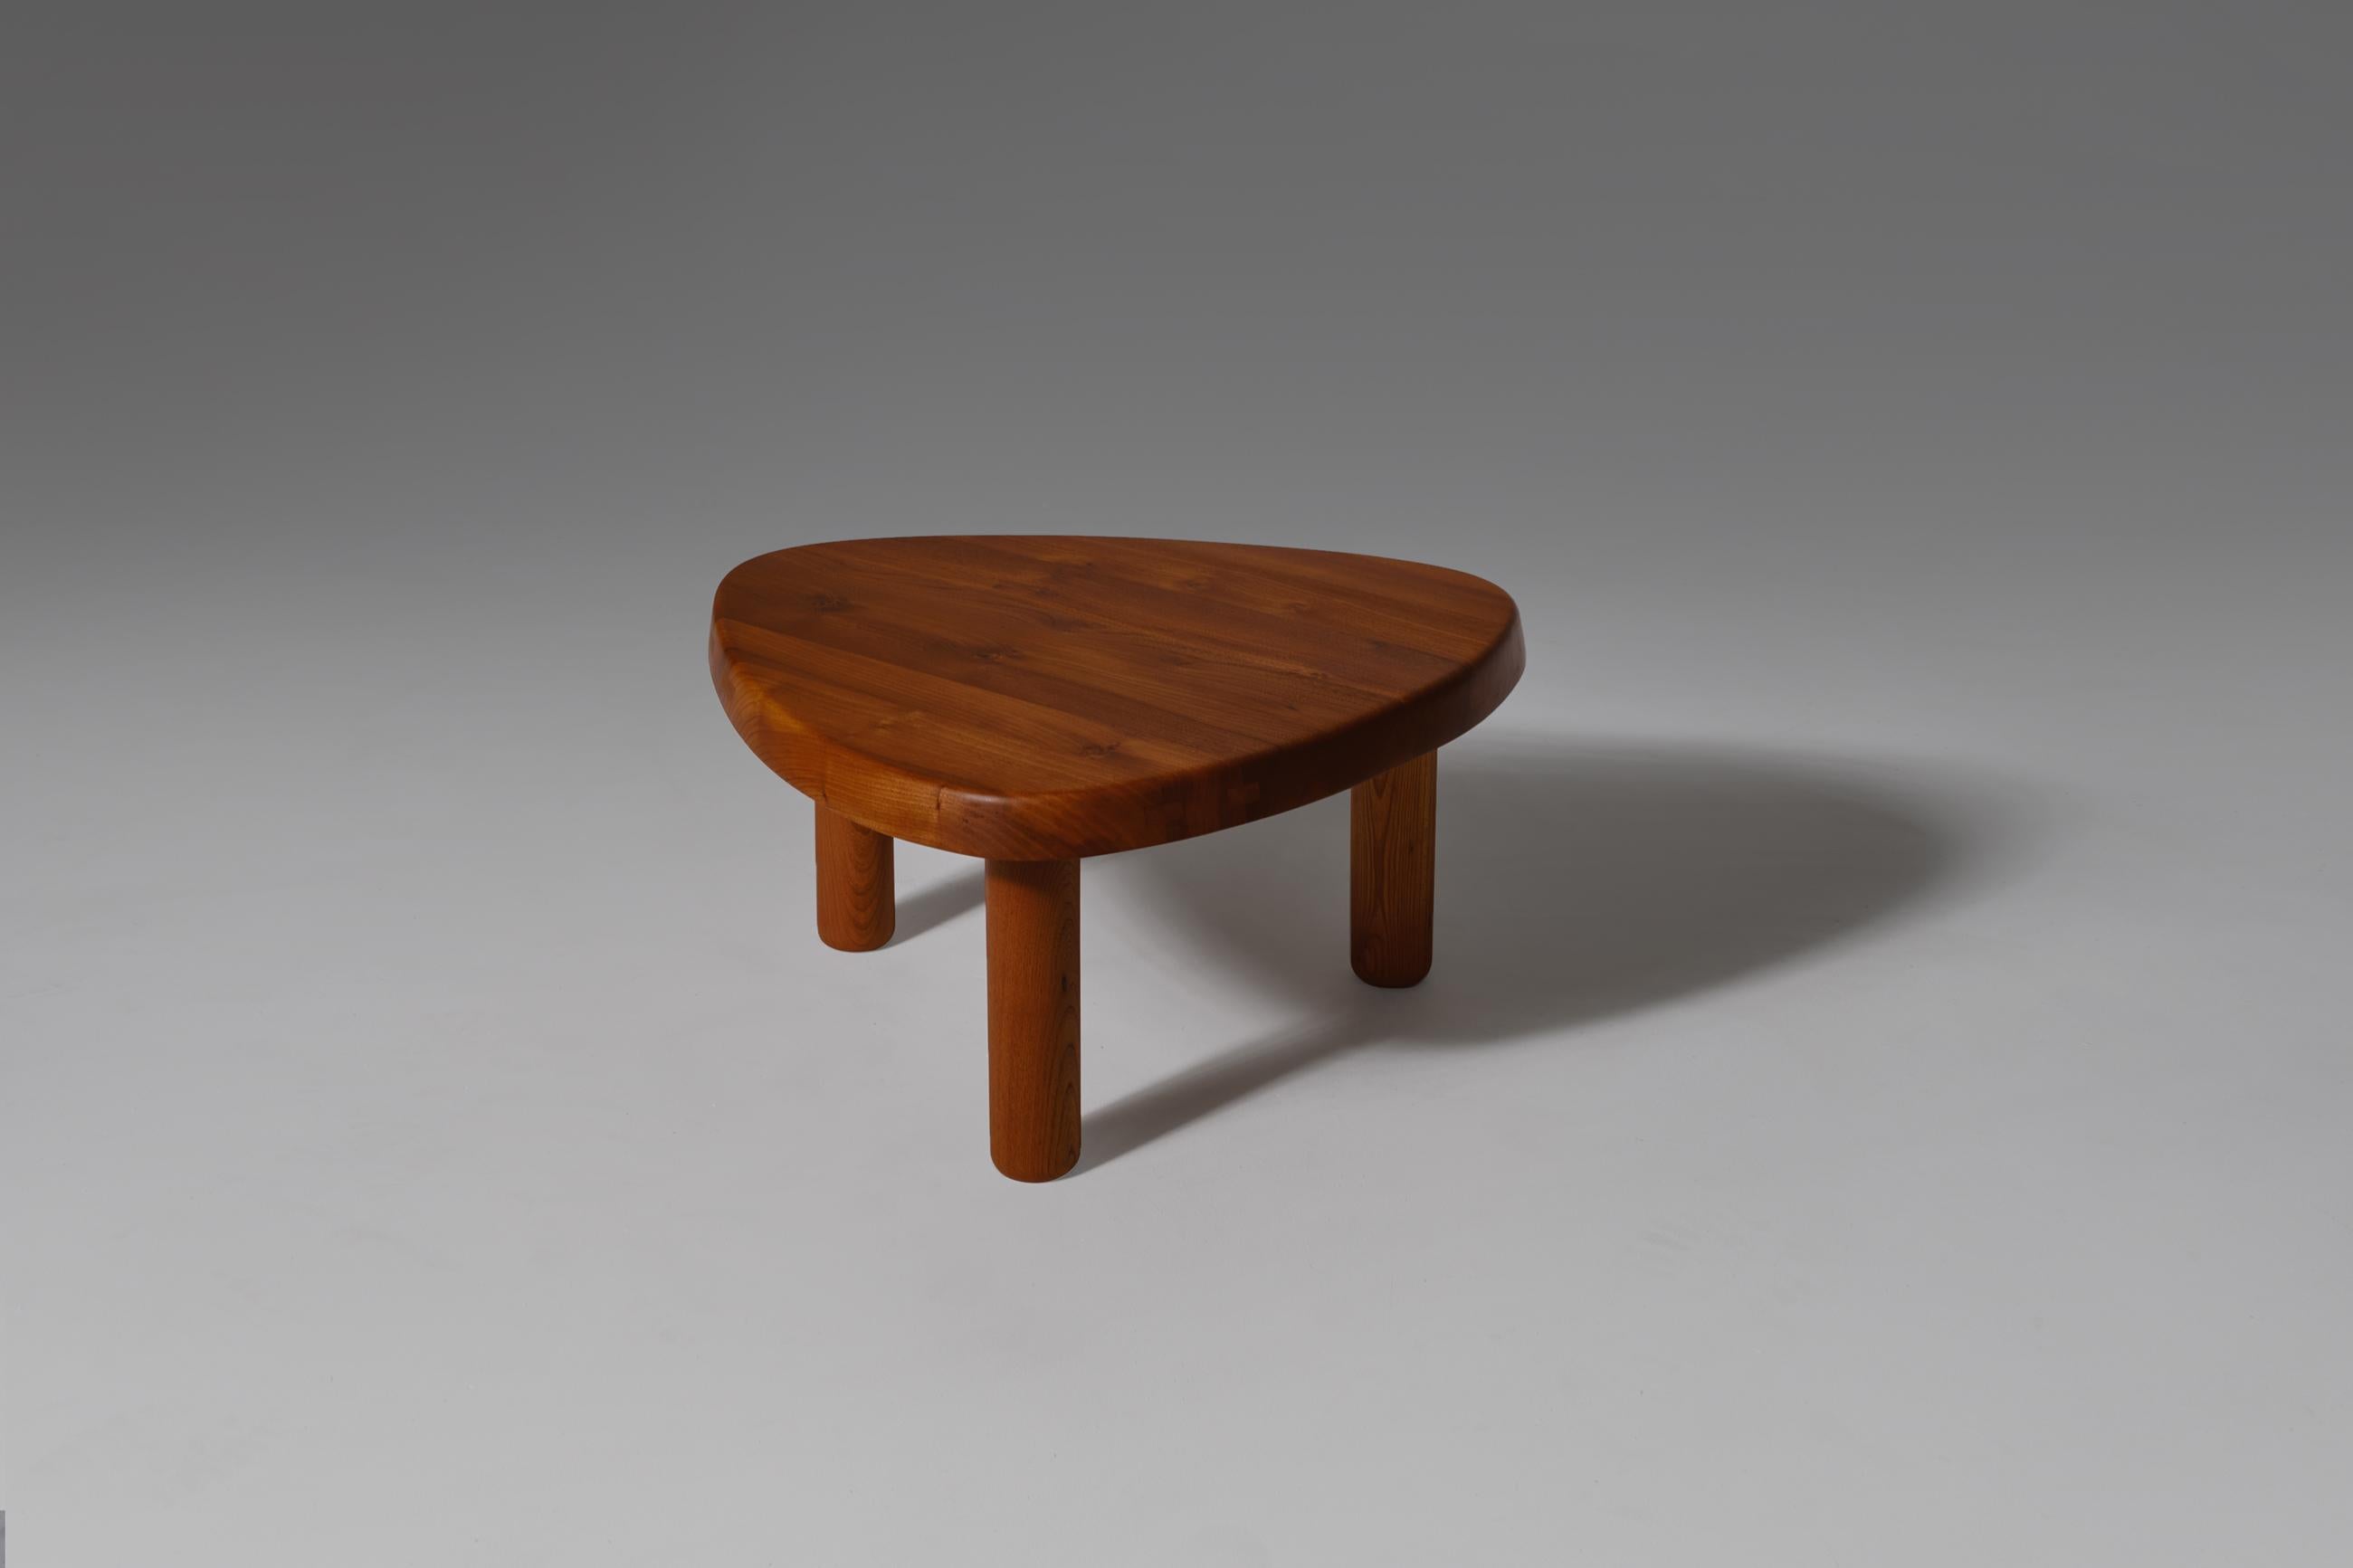 T23' side table in solid elm by Pierre Chapo, France, 1960s. Remarkable design made of a warm colored Elm wood with a beautiful exposed grain, giving it a rich, warm and natural look. The organic 'plectrum' shaped table top has nice skew lined edges